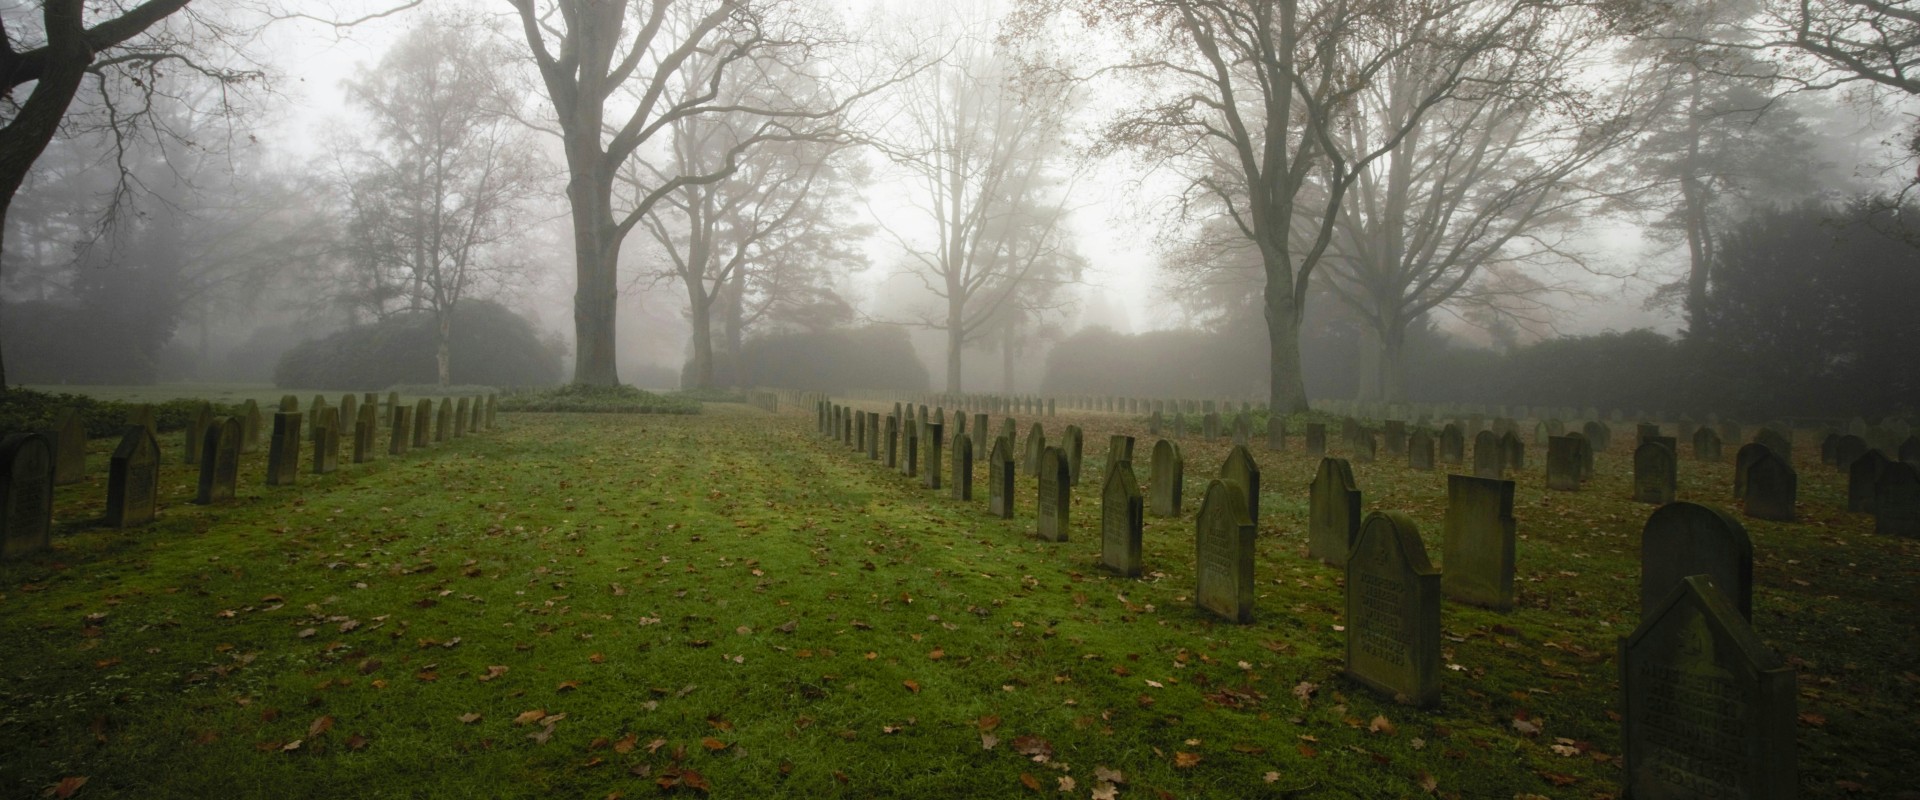 Fog descends on rows of headstones